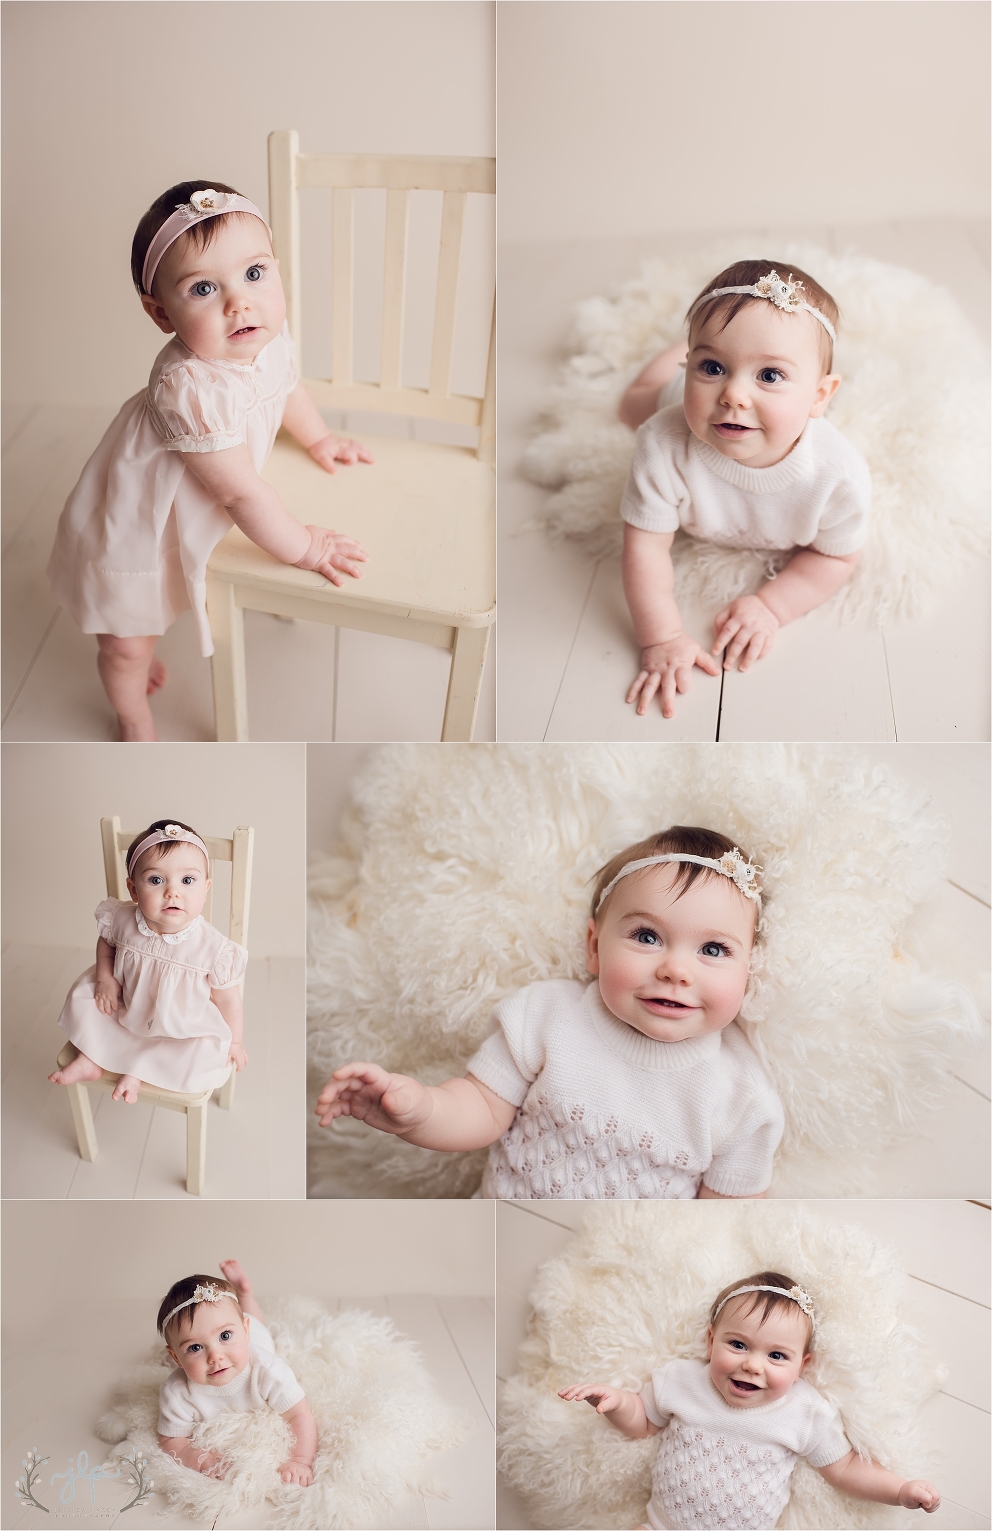 Paisley 9 Months Maryland Photographer · Jessica Lacey Photography